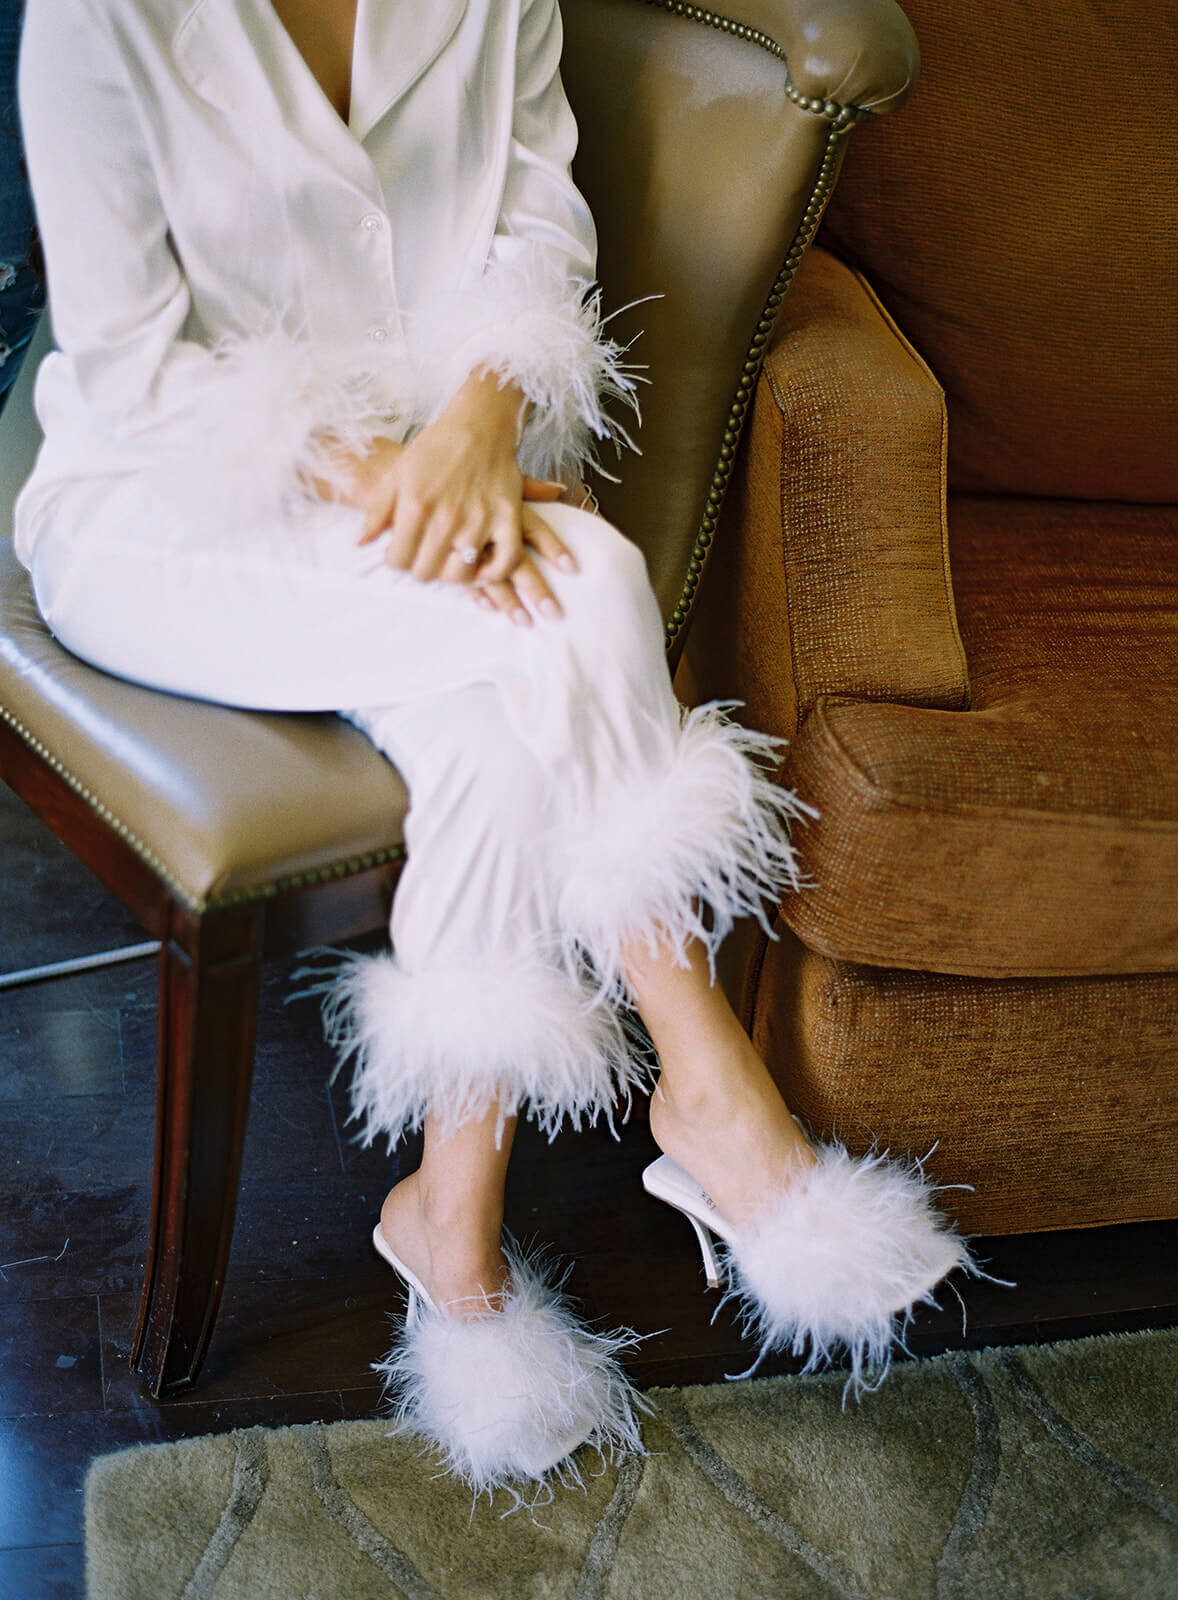 Bride with fuzzy robe and shoes before the wedding ceremony